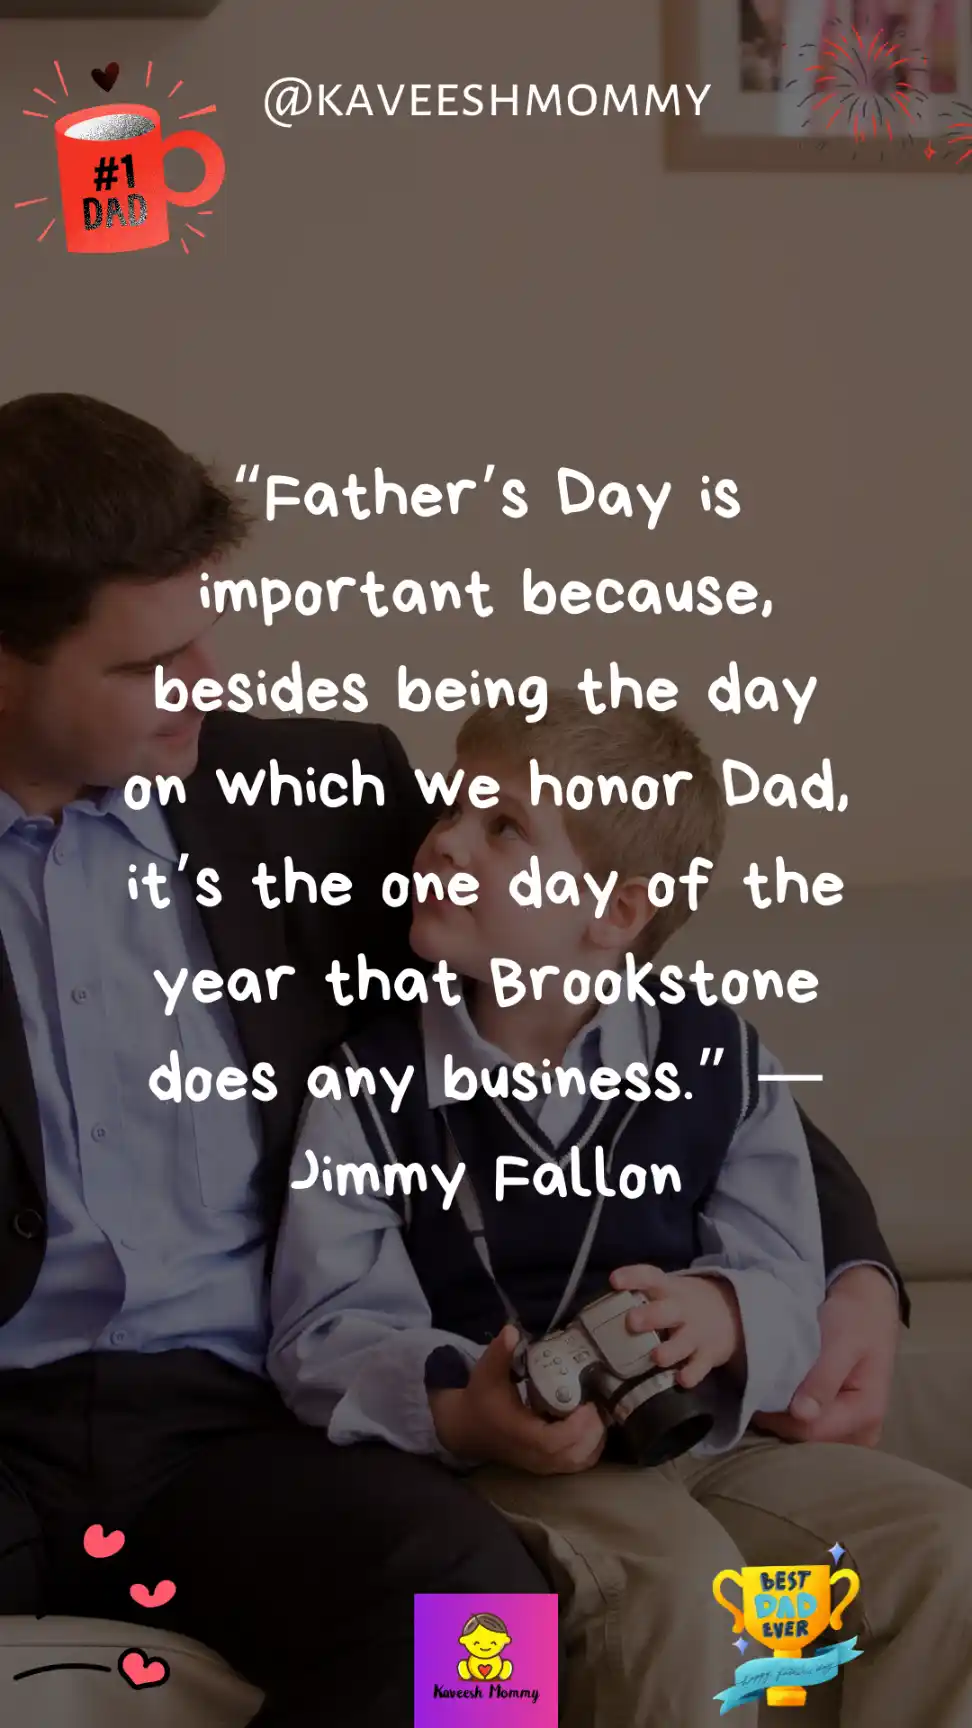 happy father's day son-Father’s Day is important because, besides being the day on which we honor Dad, it’s the one day of the year that Brookstone does any business.” —Jimmy Fallon